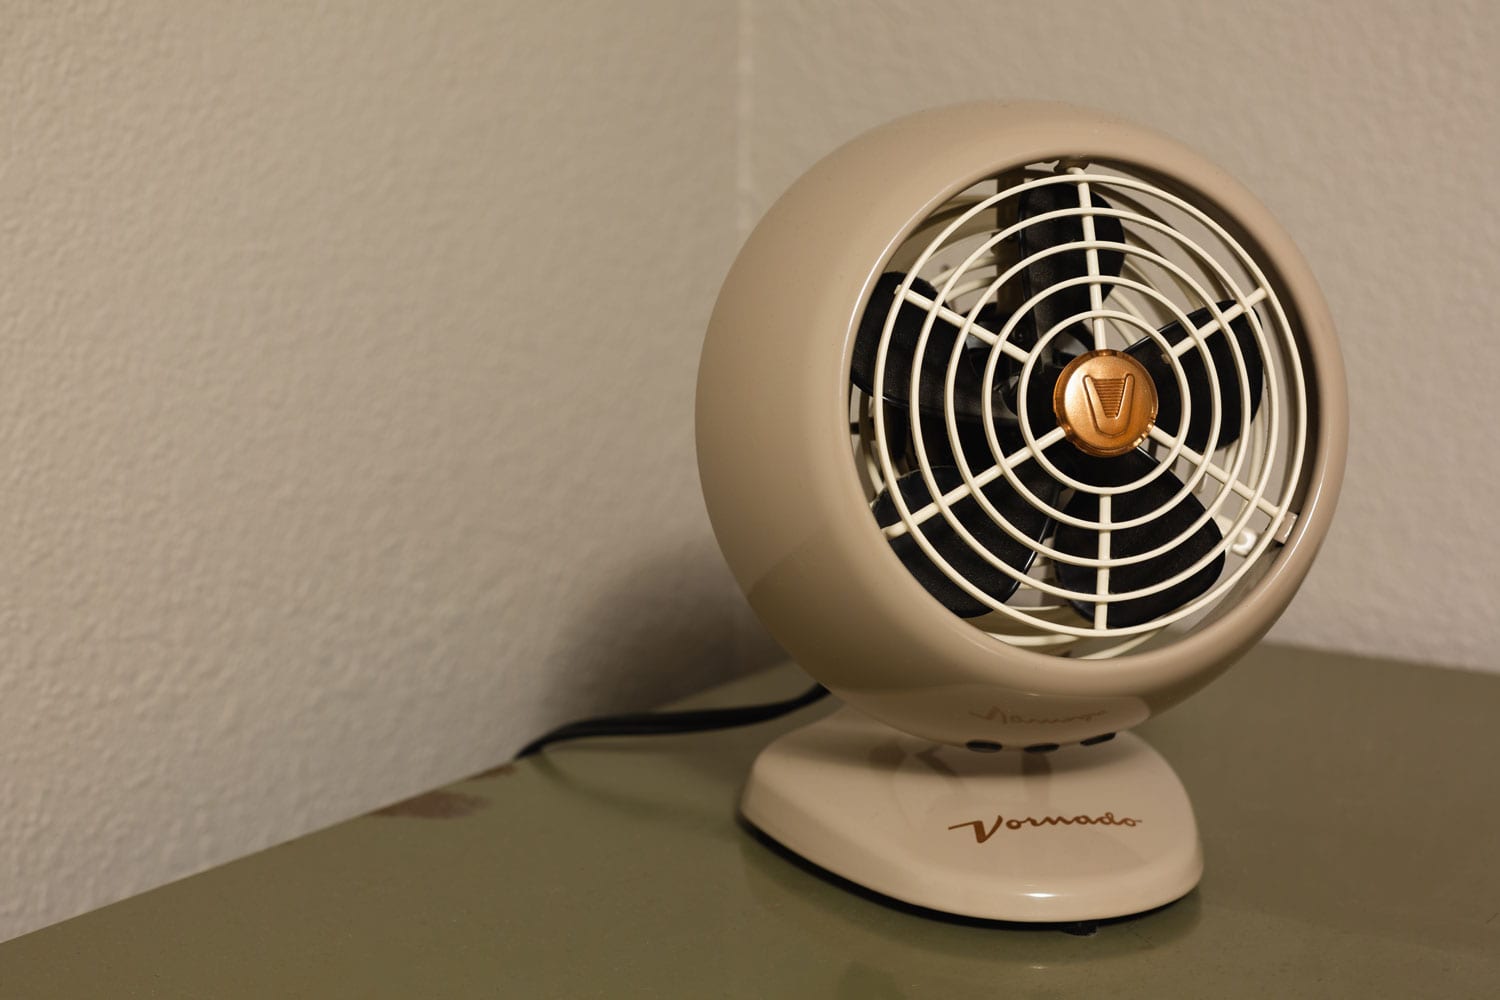 A beige colored Vornado fan at the table